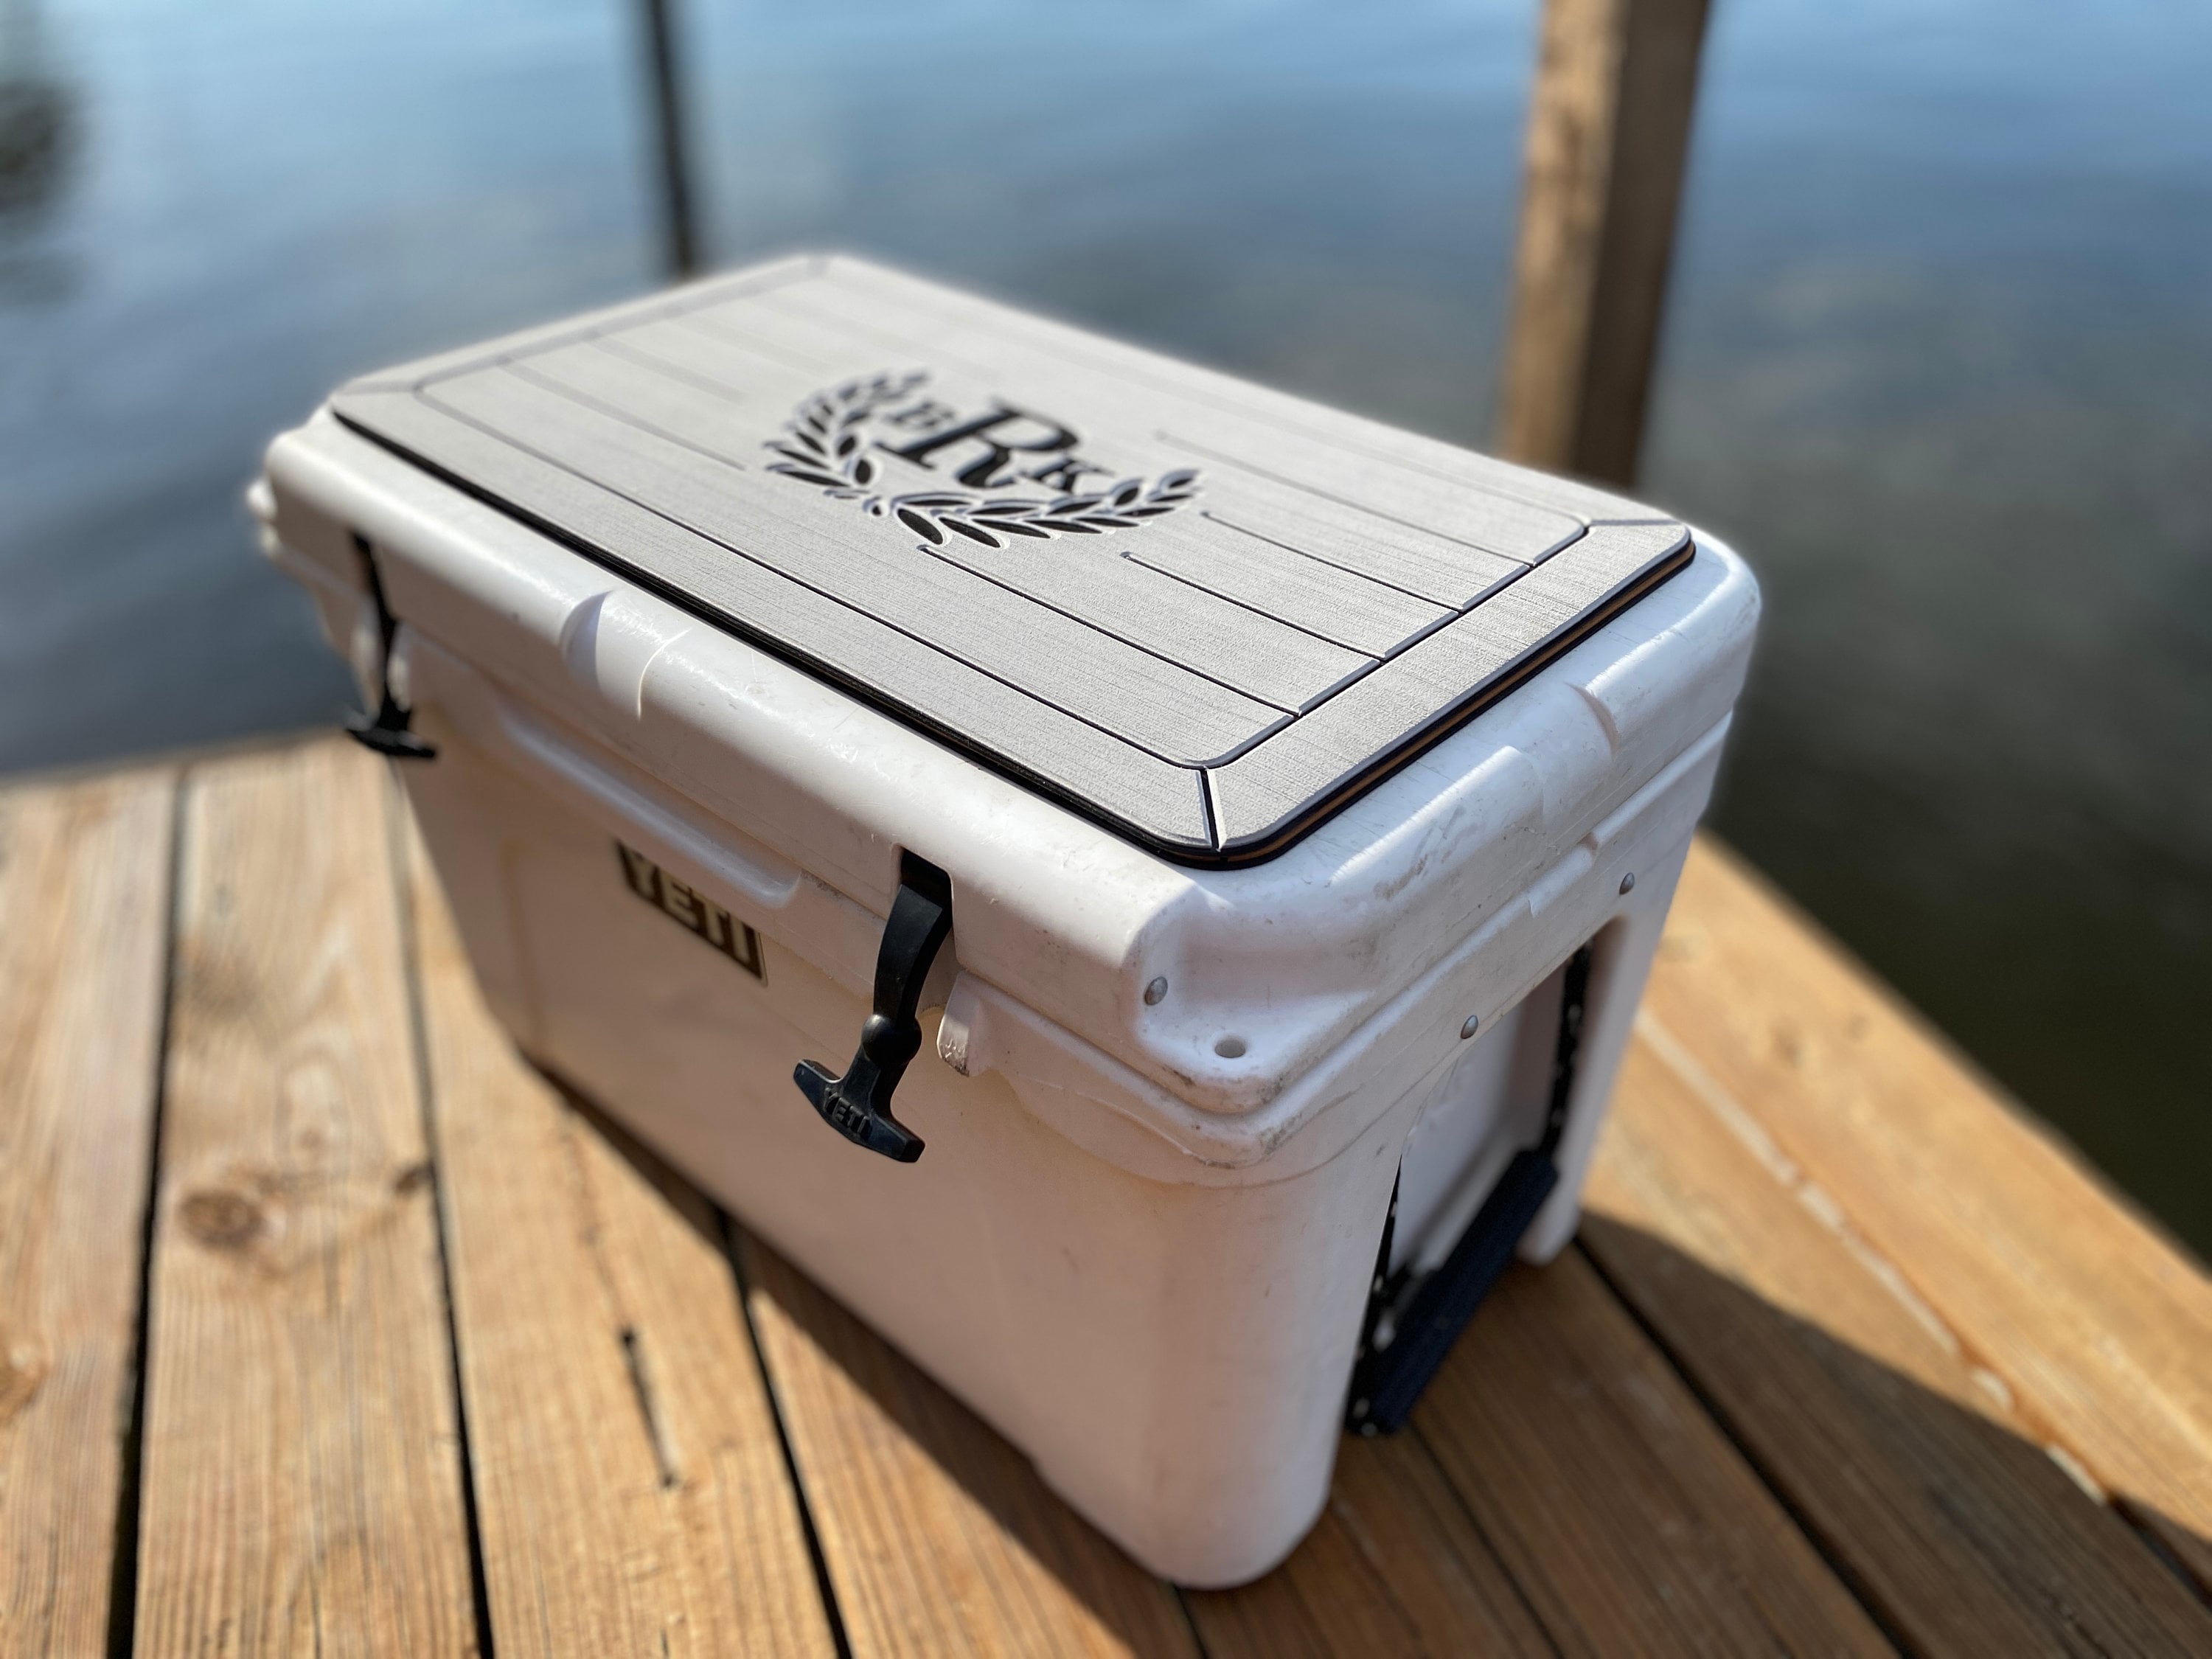 Personalized, YETI 65 Qt tundra Cooler Lid Covers, Yeti Cooler